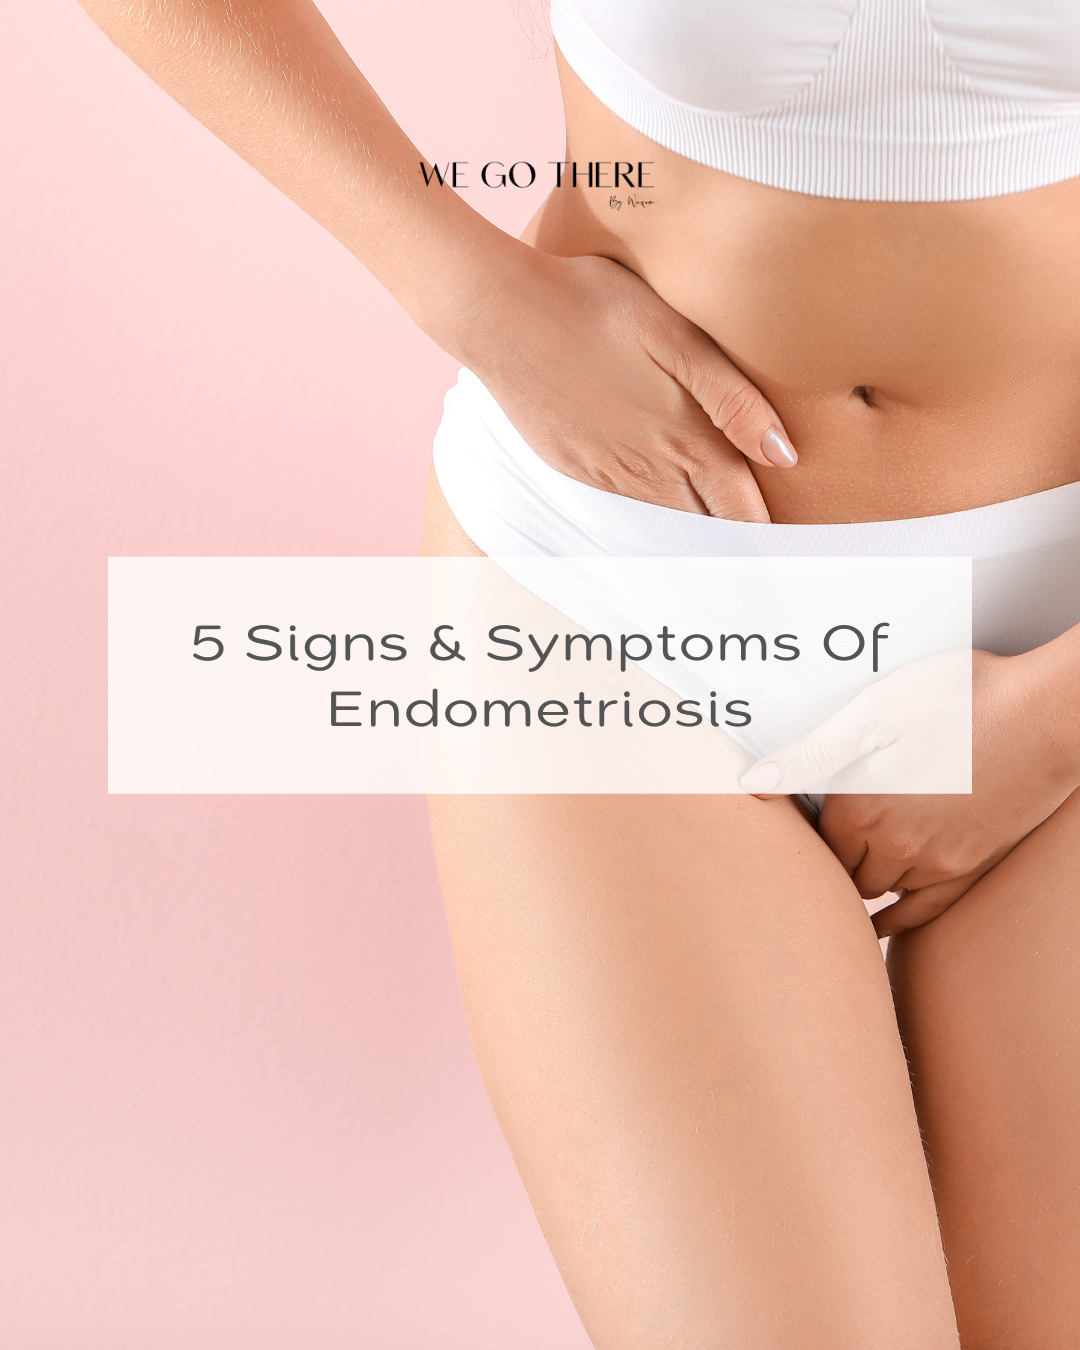 Signs & Symptoms of Endometriosis to Watch Out For